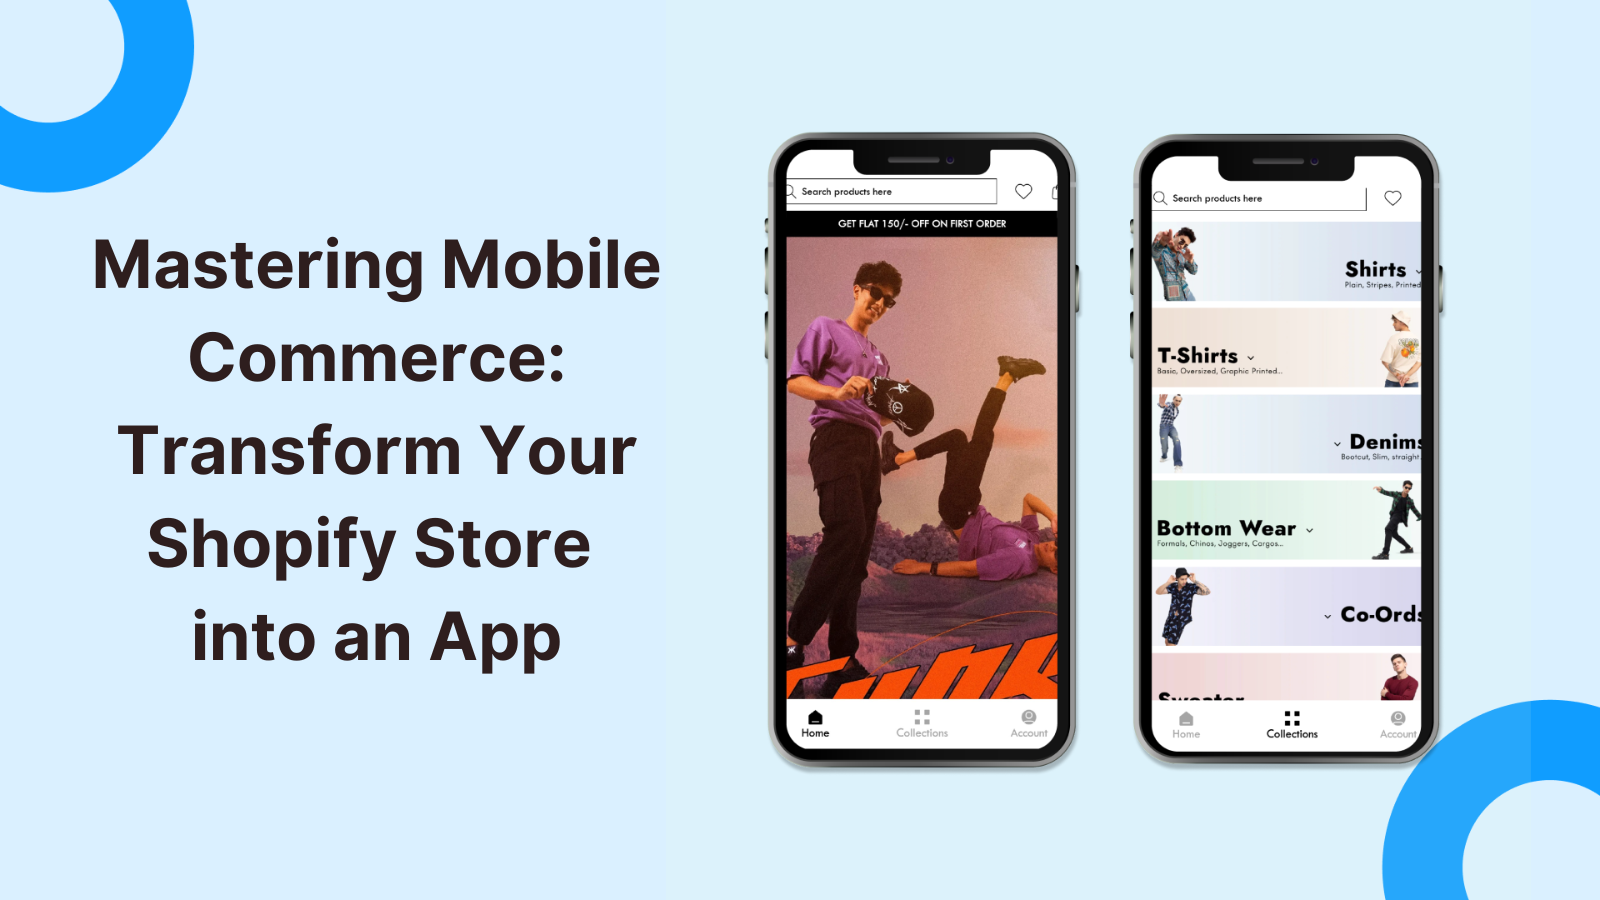 Mastering Mobile Commerce: Transform Your Shopify Store into an App with Appbrew